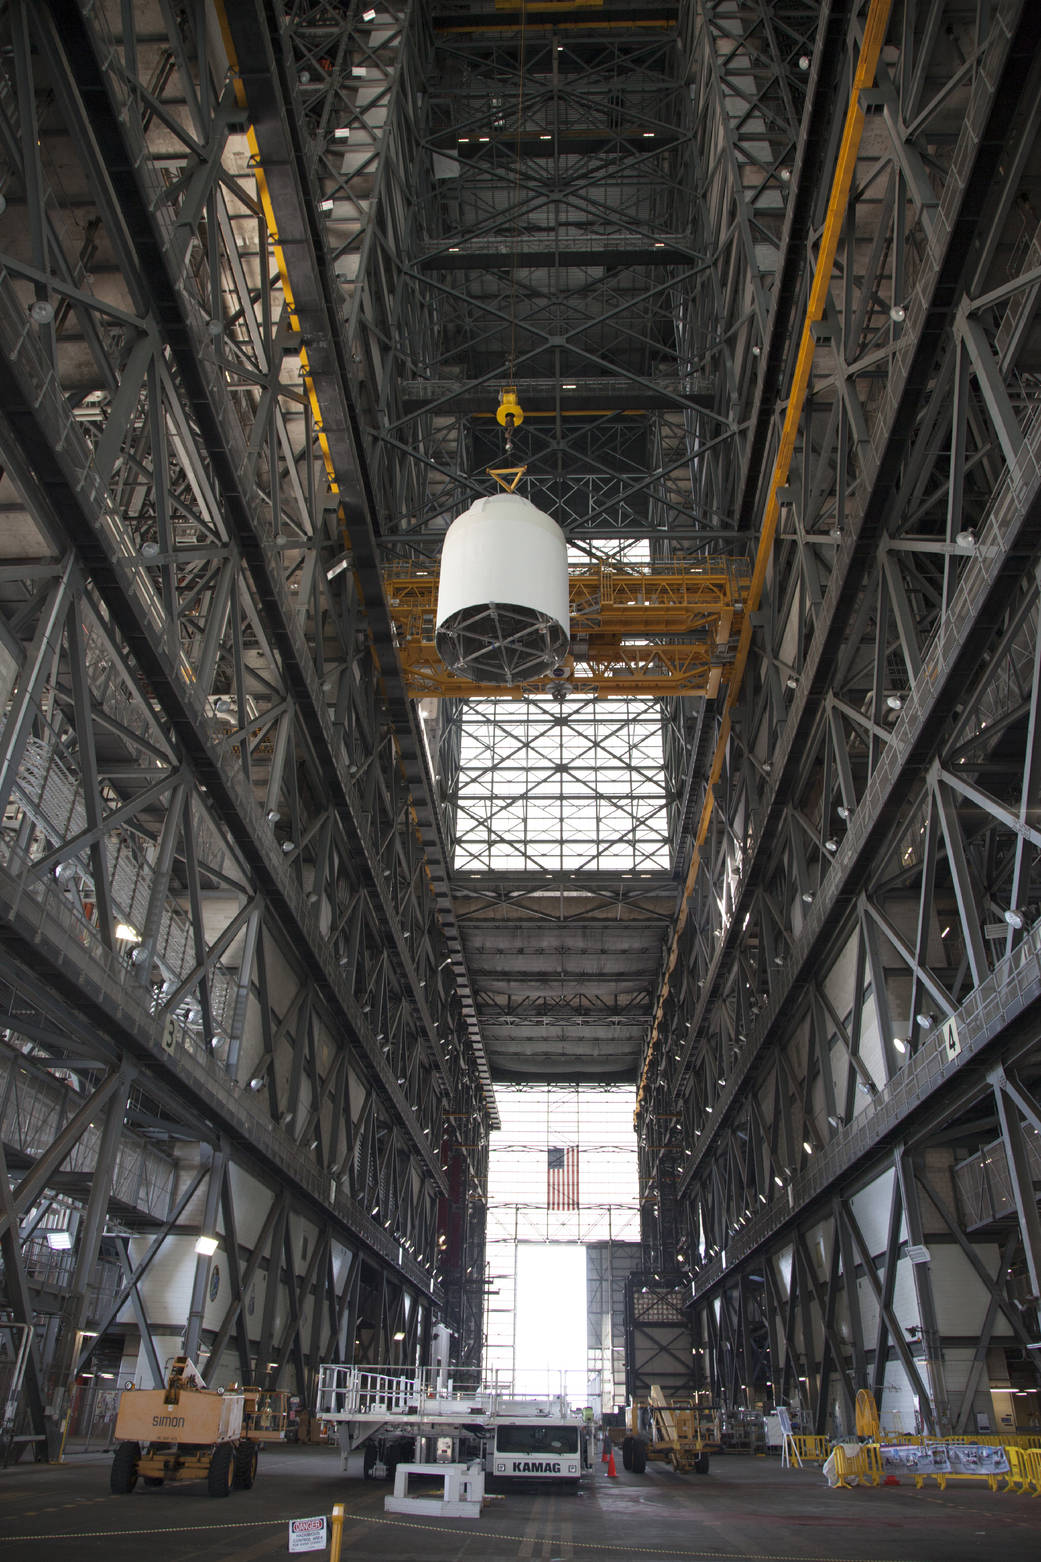 In the transfer aisle of the Vehicle Assembly Building at NASA’s Kennedy Space Center in Florida, a crane operator lifts a ful